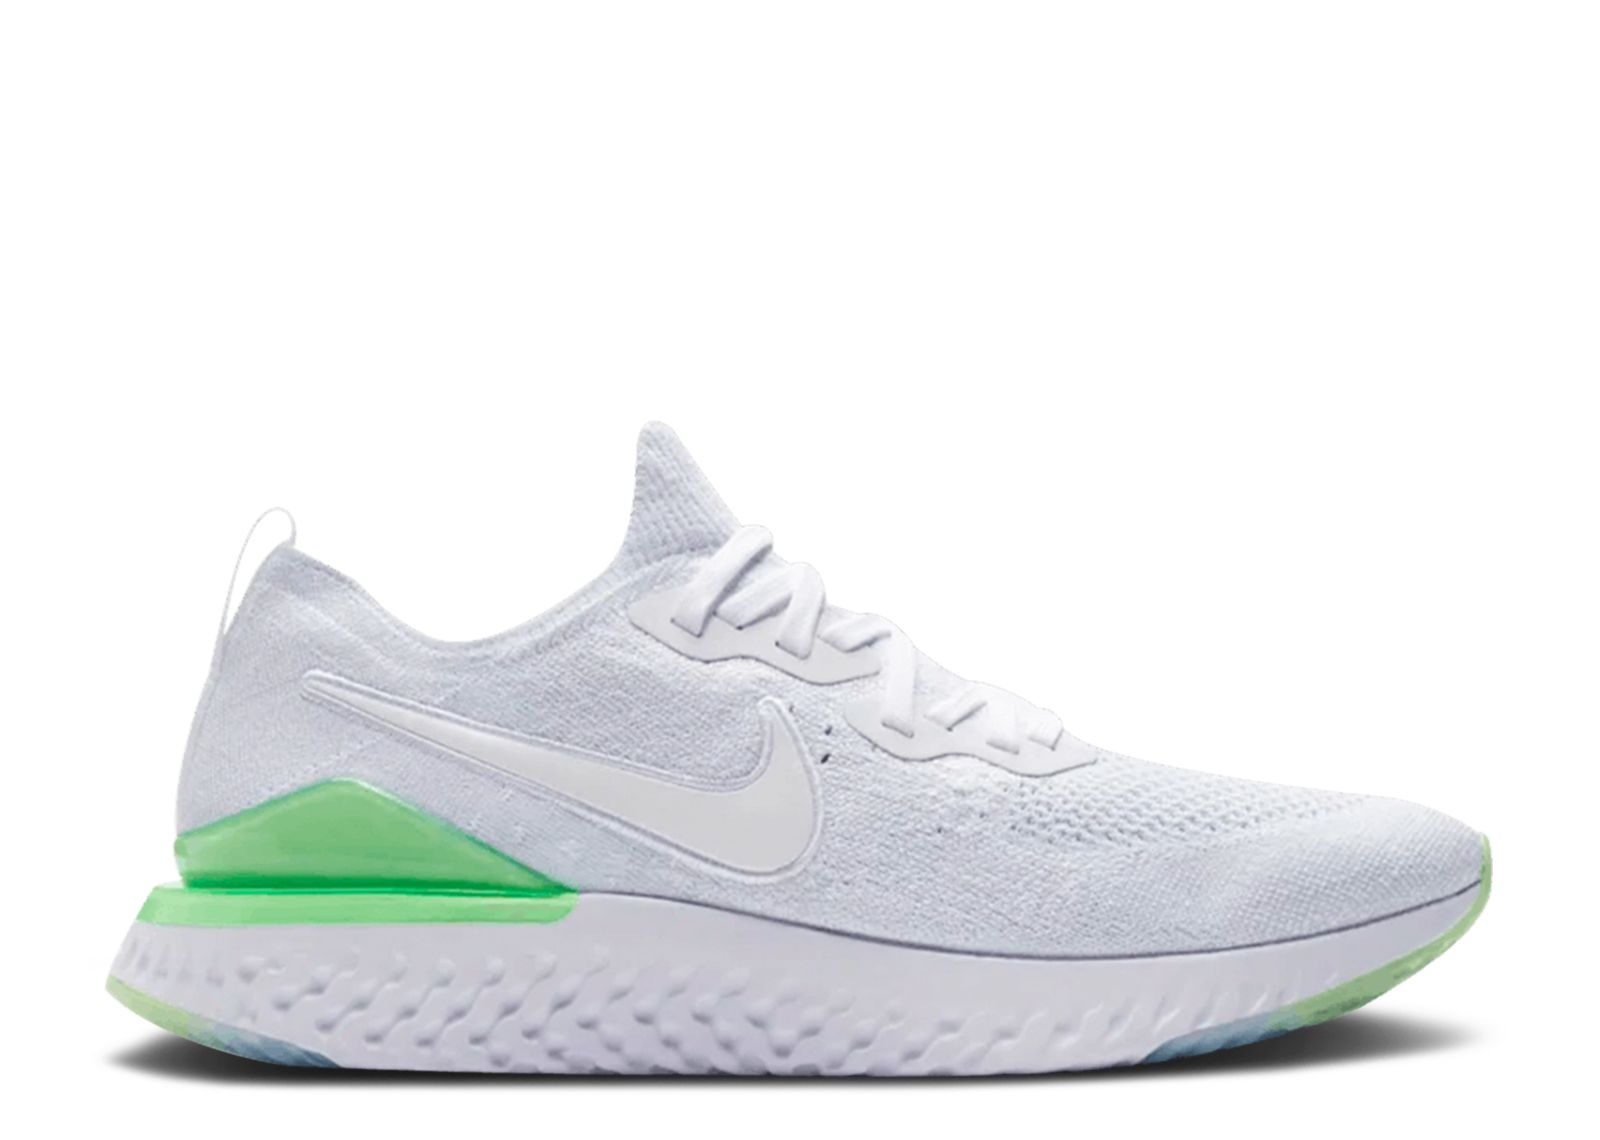 Кроссовки Nike Epic React Flyknit 2 'Lime Blast', белый nike epic react flyknit women s rhea braided flying woven running shoes size 36 40